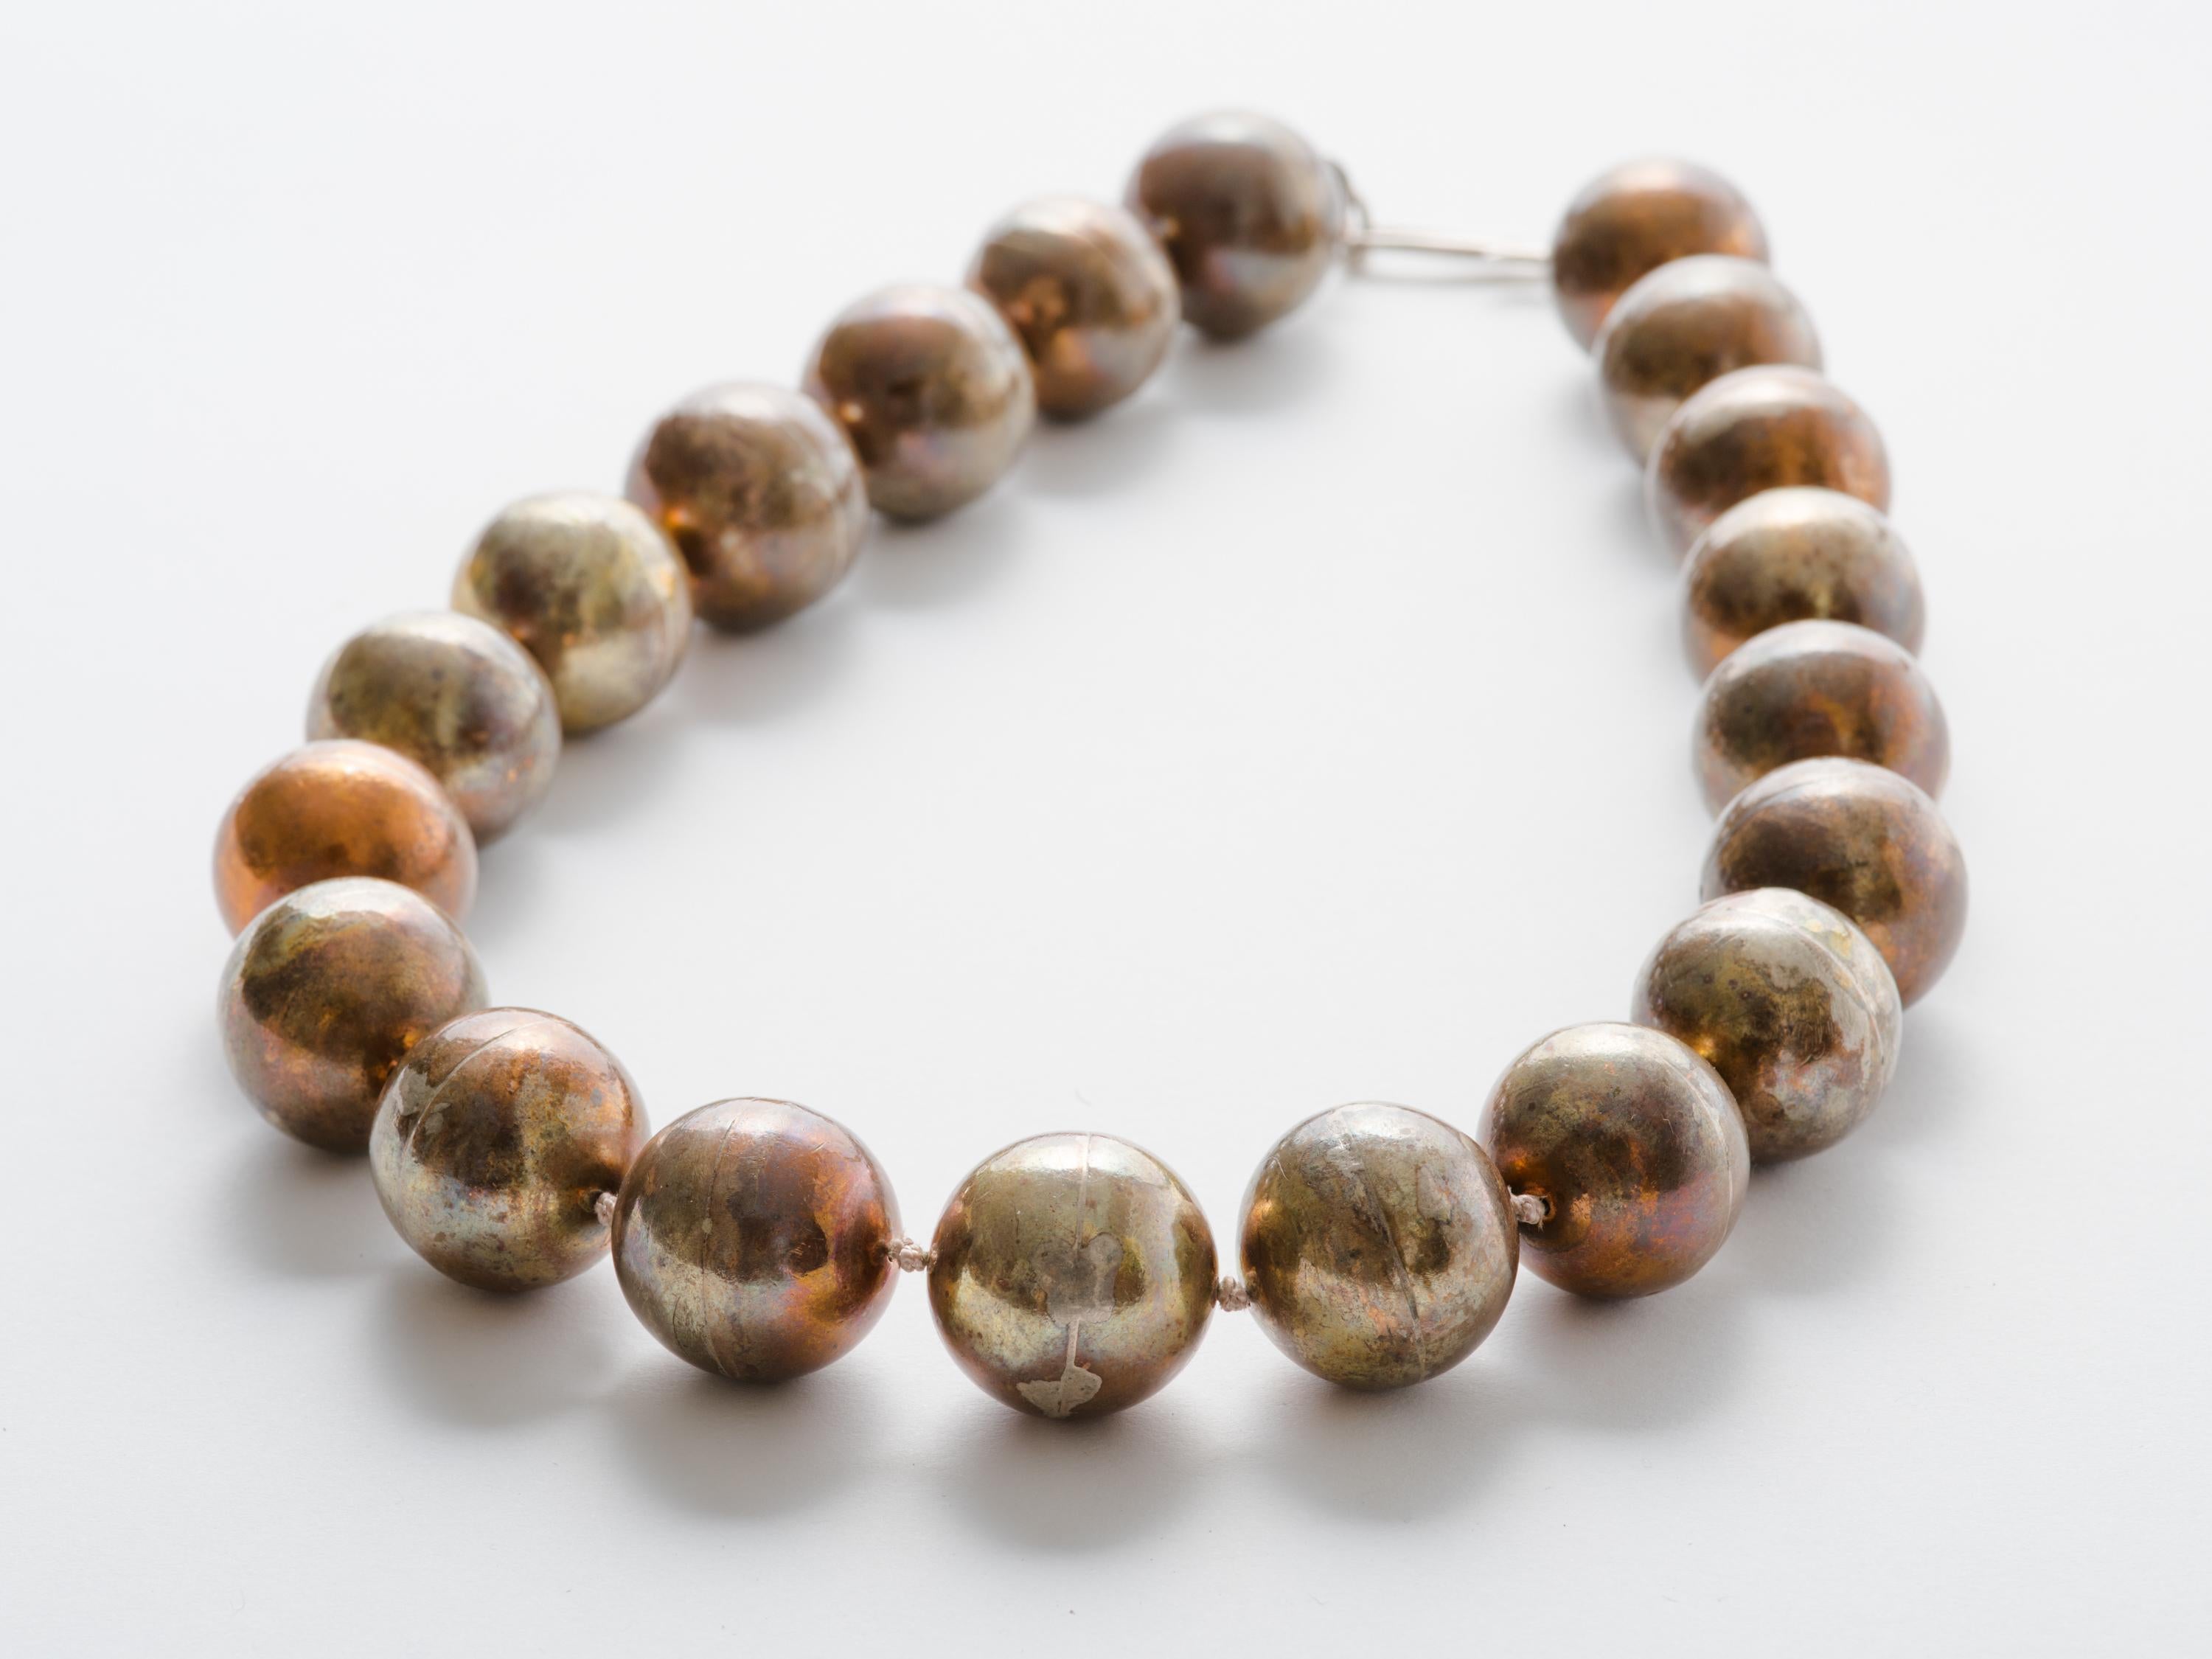 Hand crafted large bronze bead necklace with sterling silver catch by jewelry artist Mark Timmerman. Necklace has 20 handmade bronze beads measuring 7/8